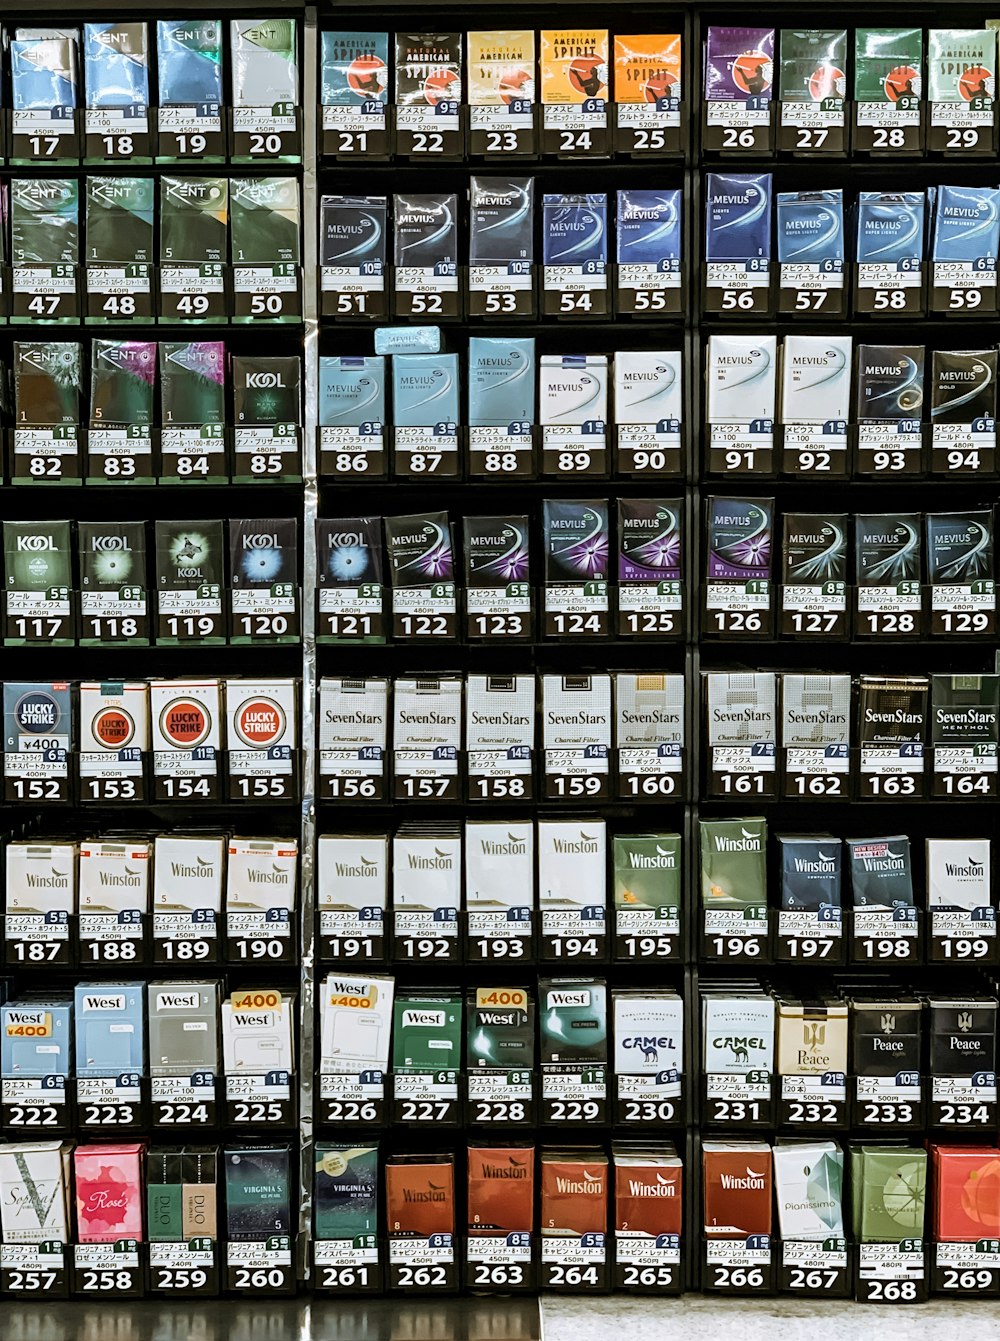 assorted flavor of cigarettes on display